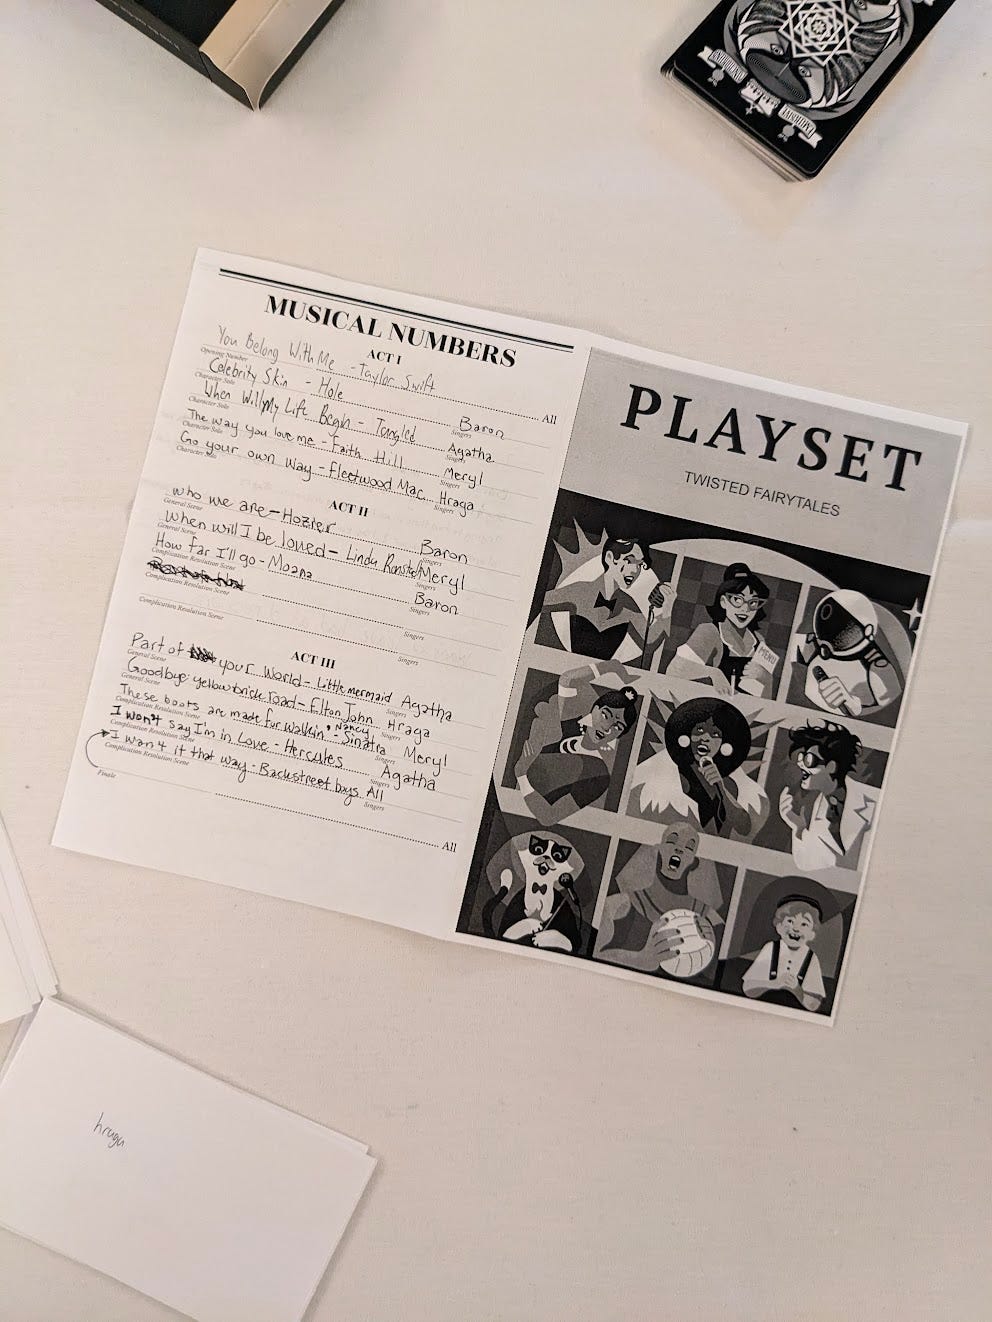 A black and white printout of the Twisted Fairytales Jukebox playset, including a song list of every song the players sang during the game.